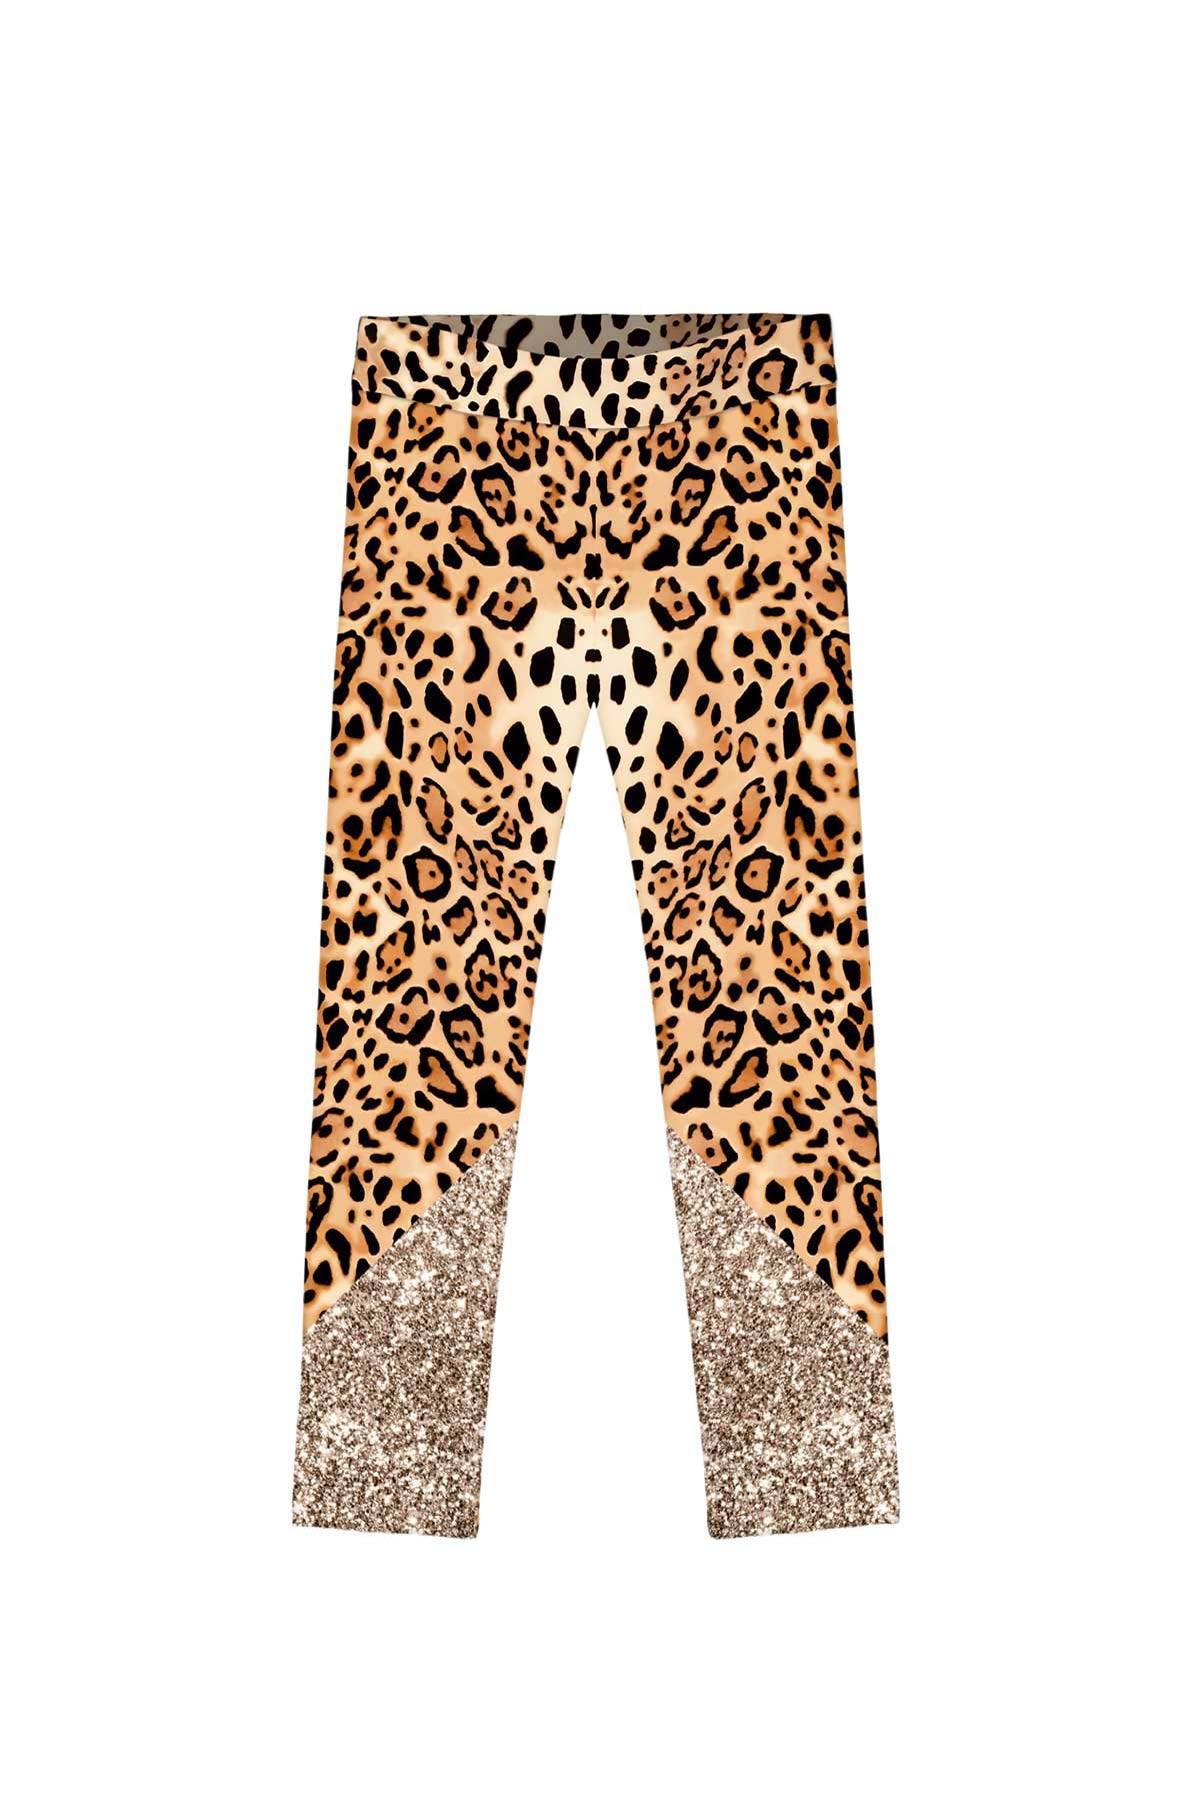 3 for $49! Let's Go Wild Lucy Brown & Gold Animal Leopard Print Leggings - Kids - Pineapple Clothing